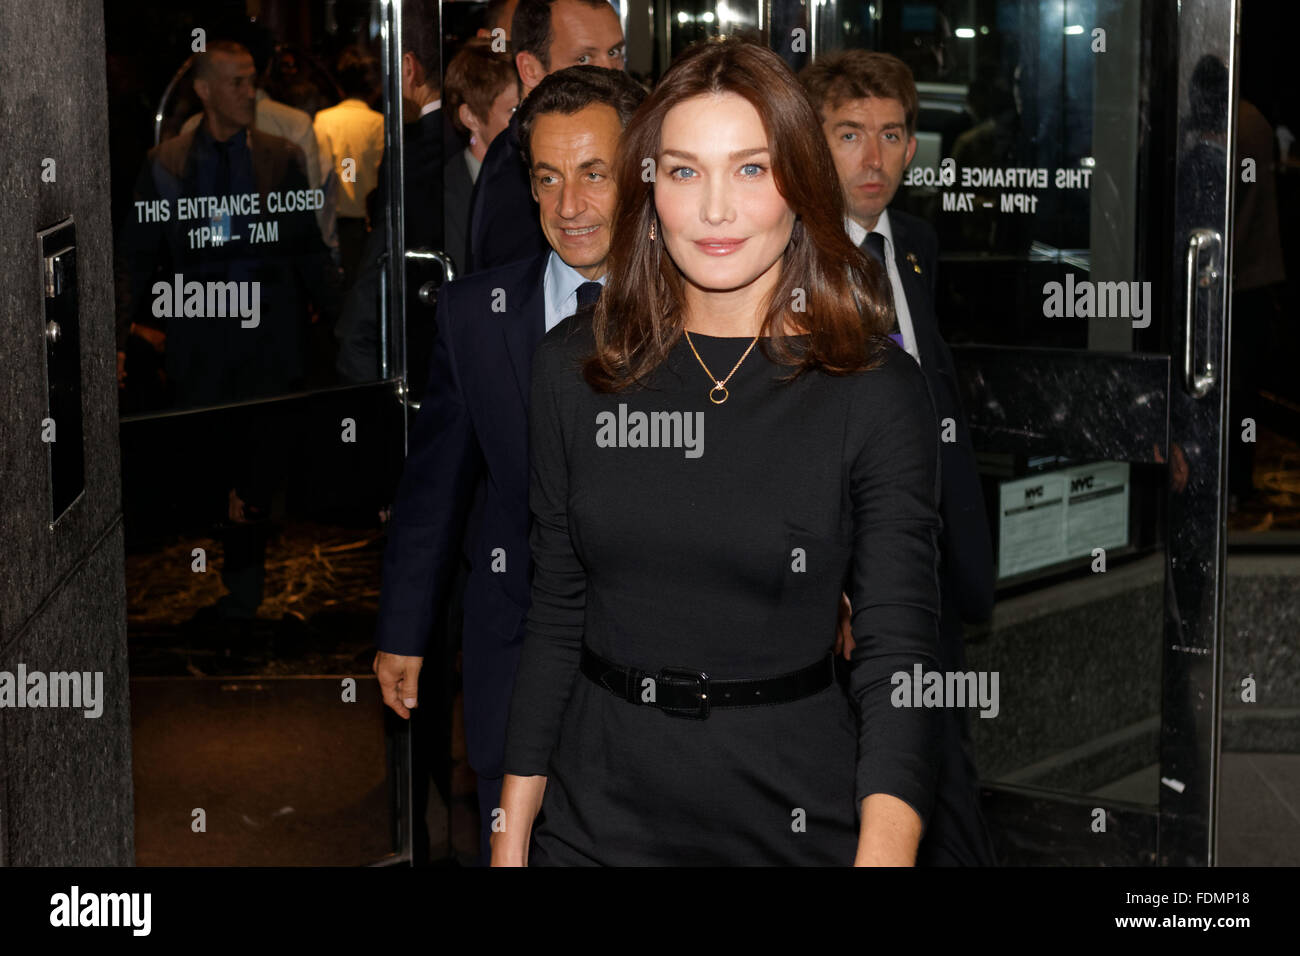 Former French President Nicolas Sarkozy and wife Carla Bruni in New York City. photo by Trevor Collens Stock Photo